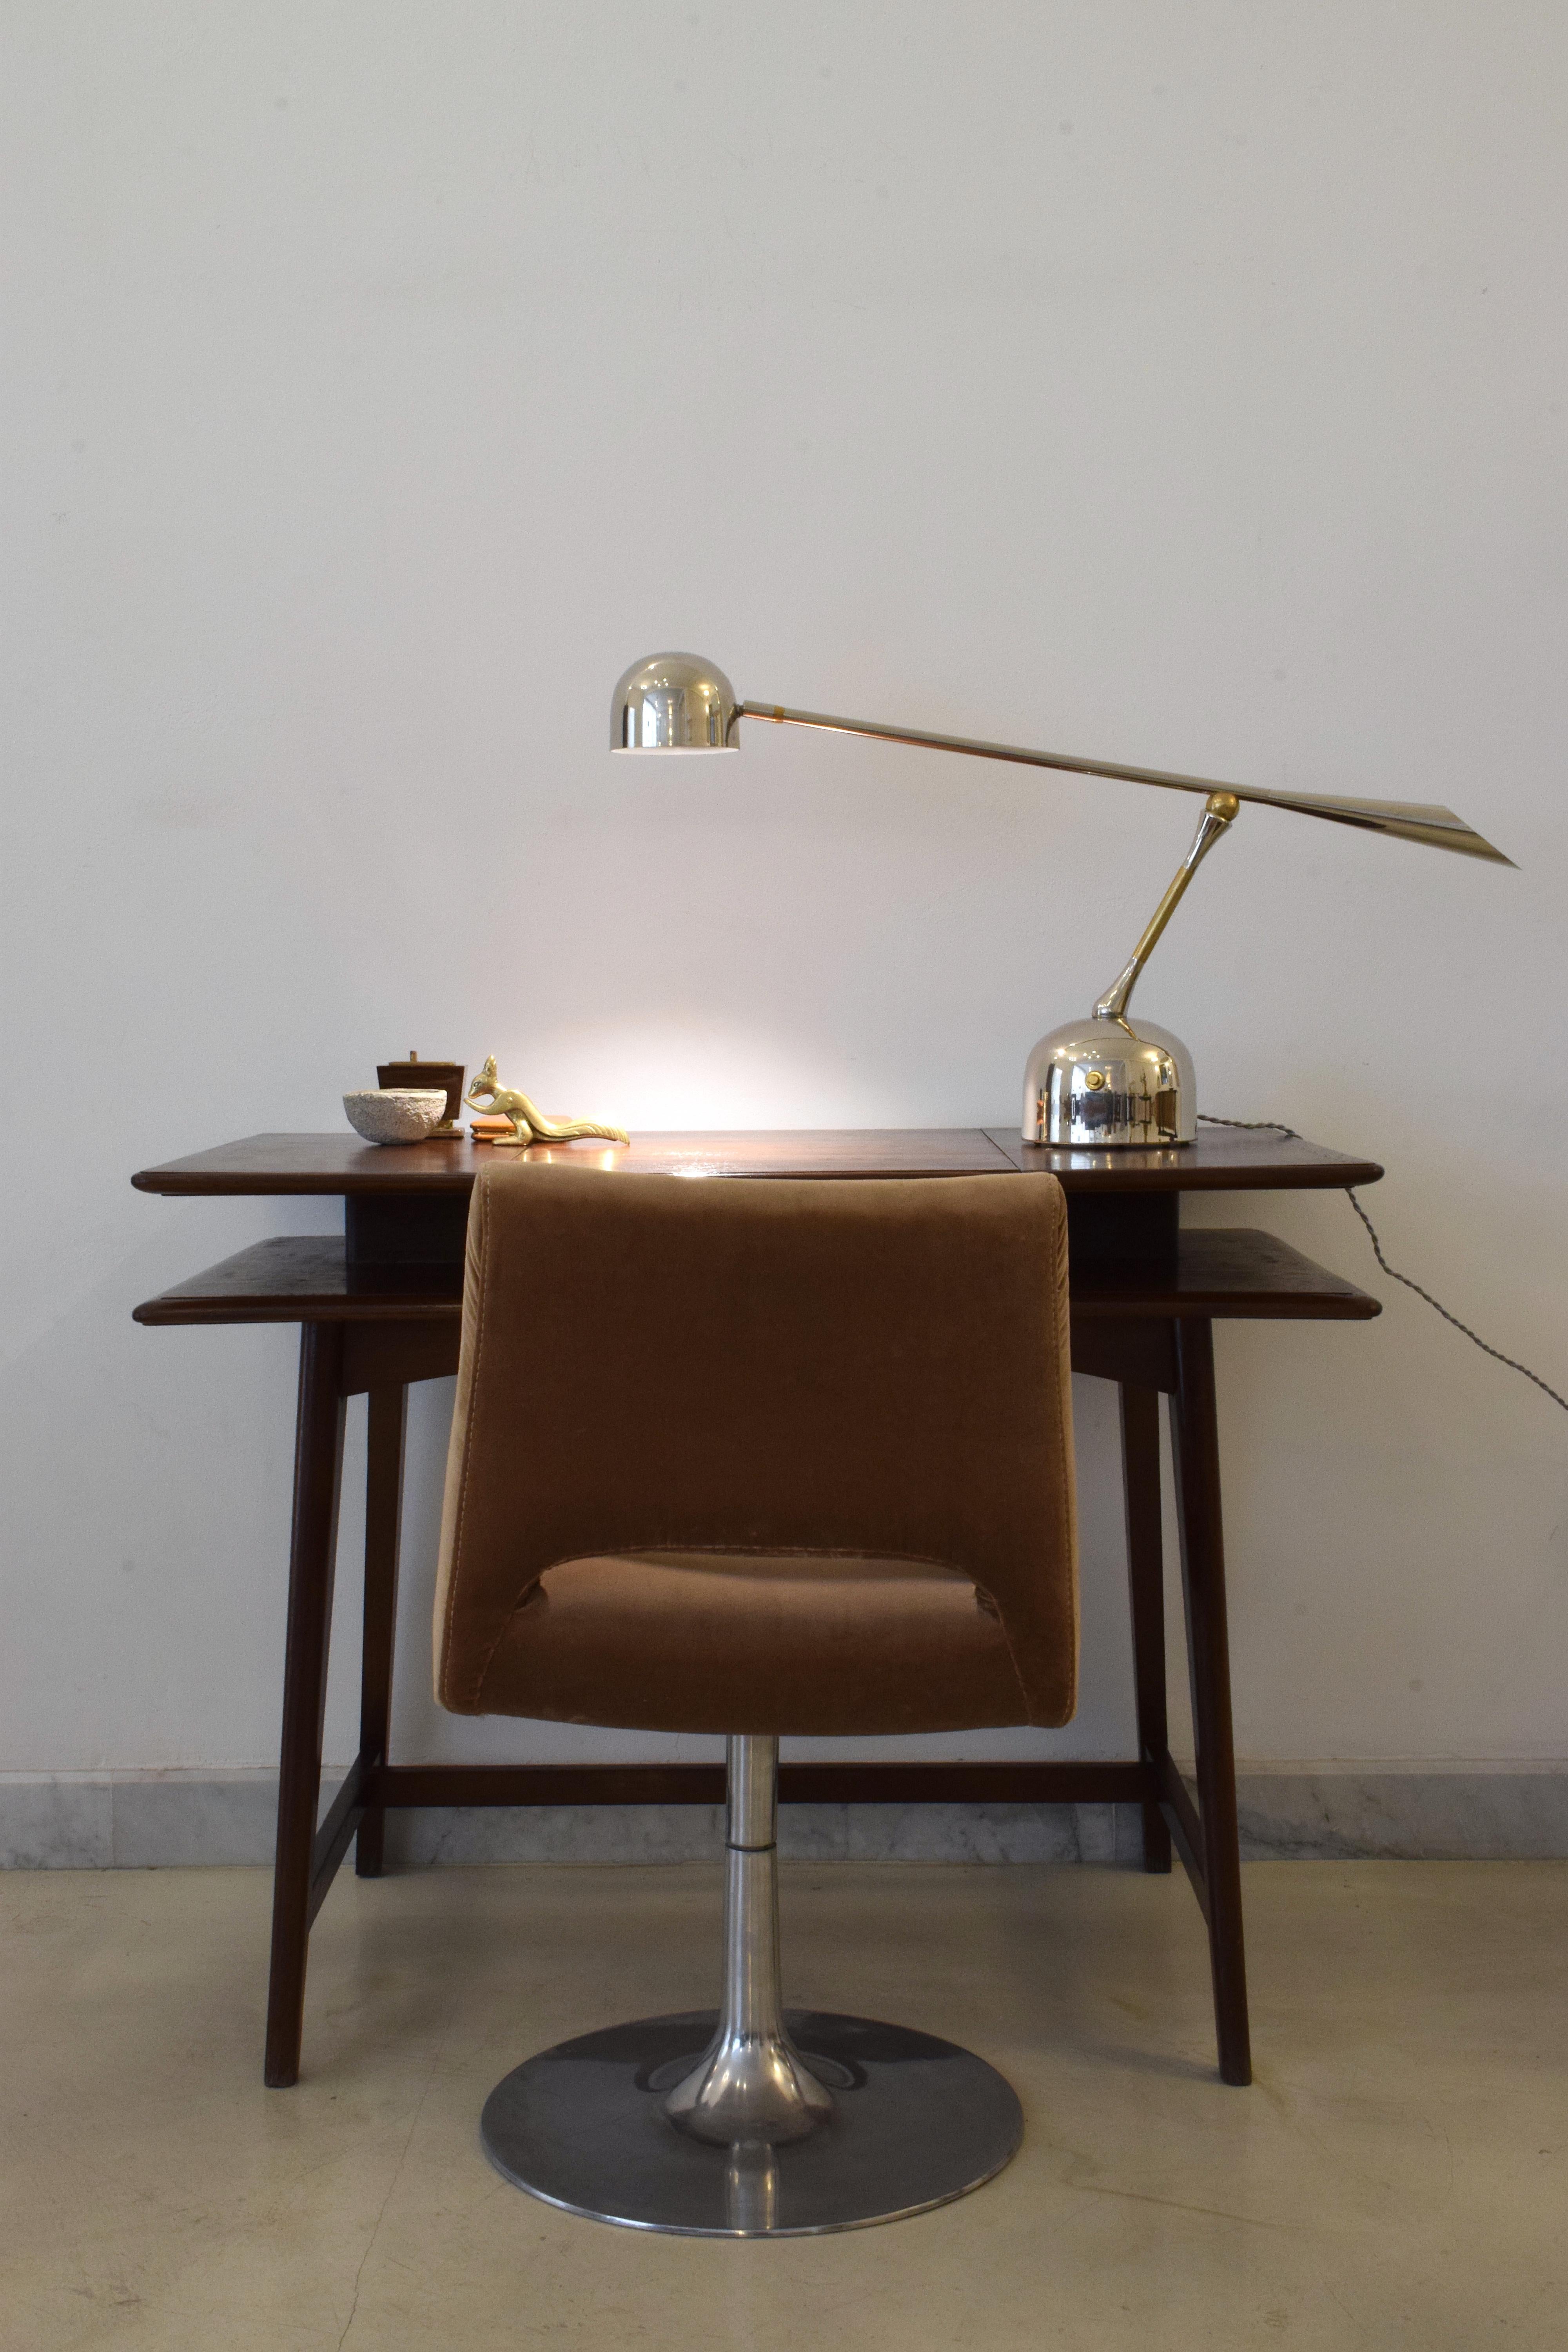 Contemporary handcrafted articulating desk, accent or nightstands lamp composed of a gold polished brass structure, unique 360° pear shaped joints and optional meticulous hand-engraved details. This piece rotates around three axis: the shade, the